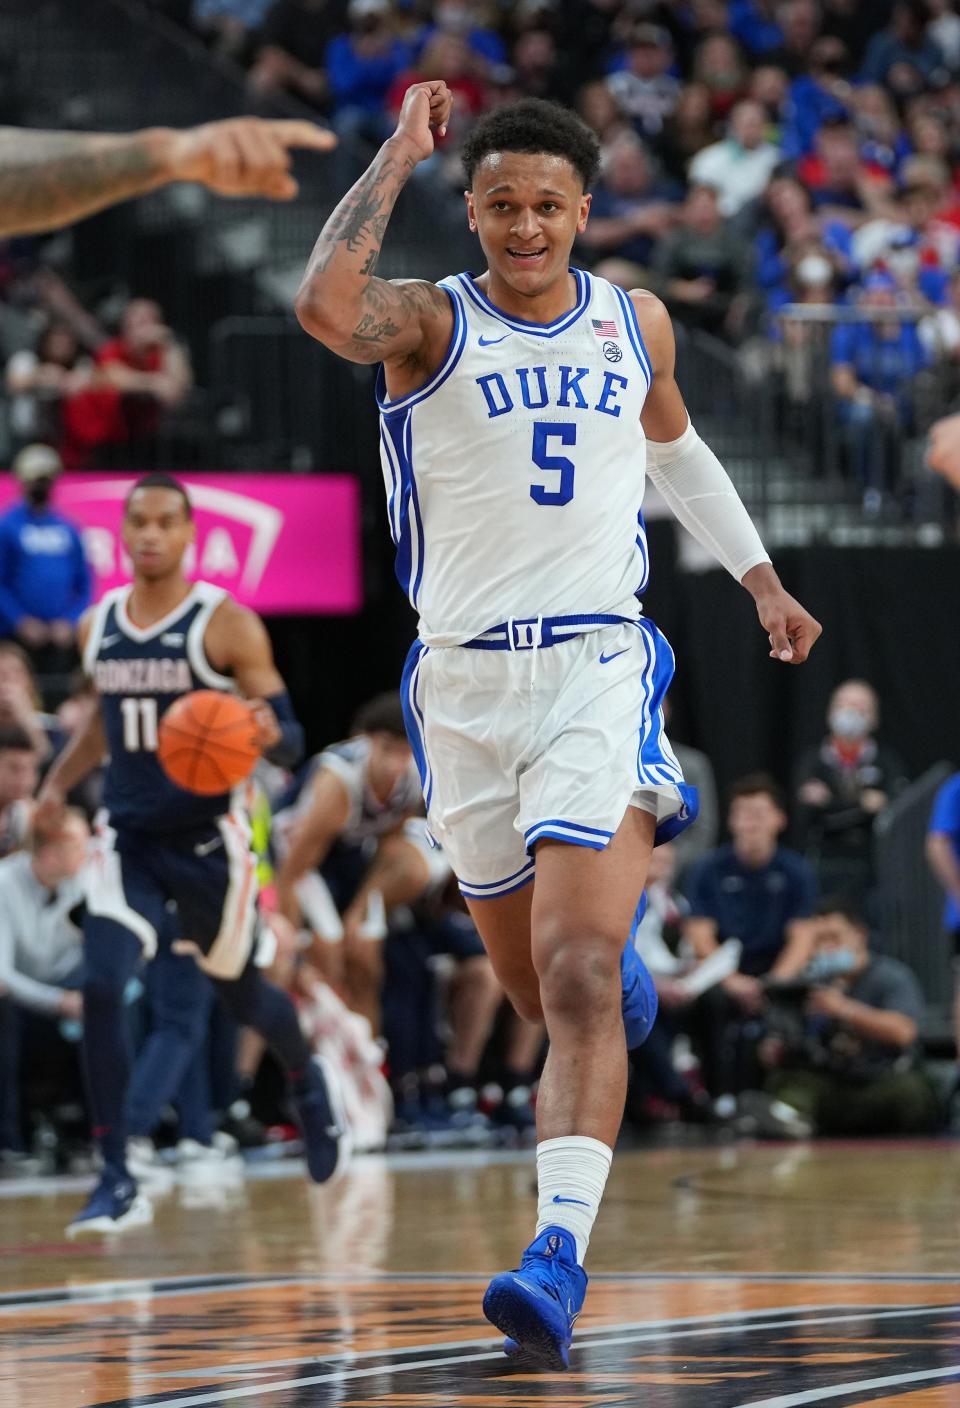 Paolo Banchero scored a team-high 21 points for Duke.